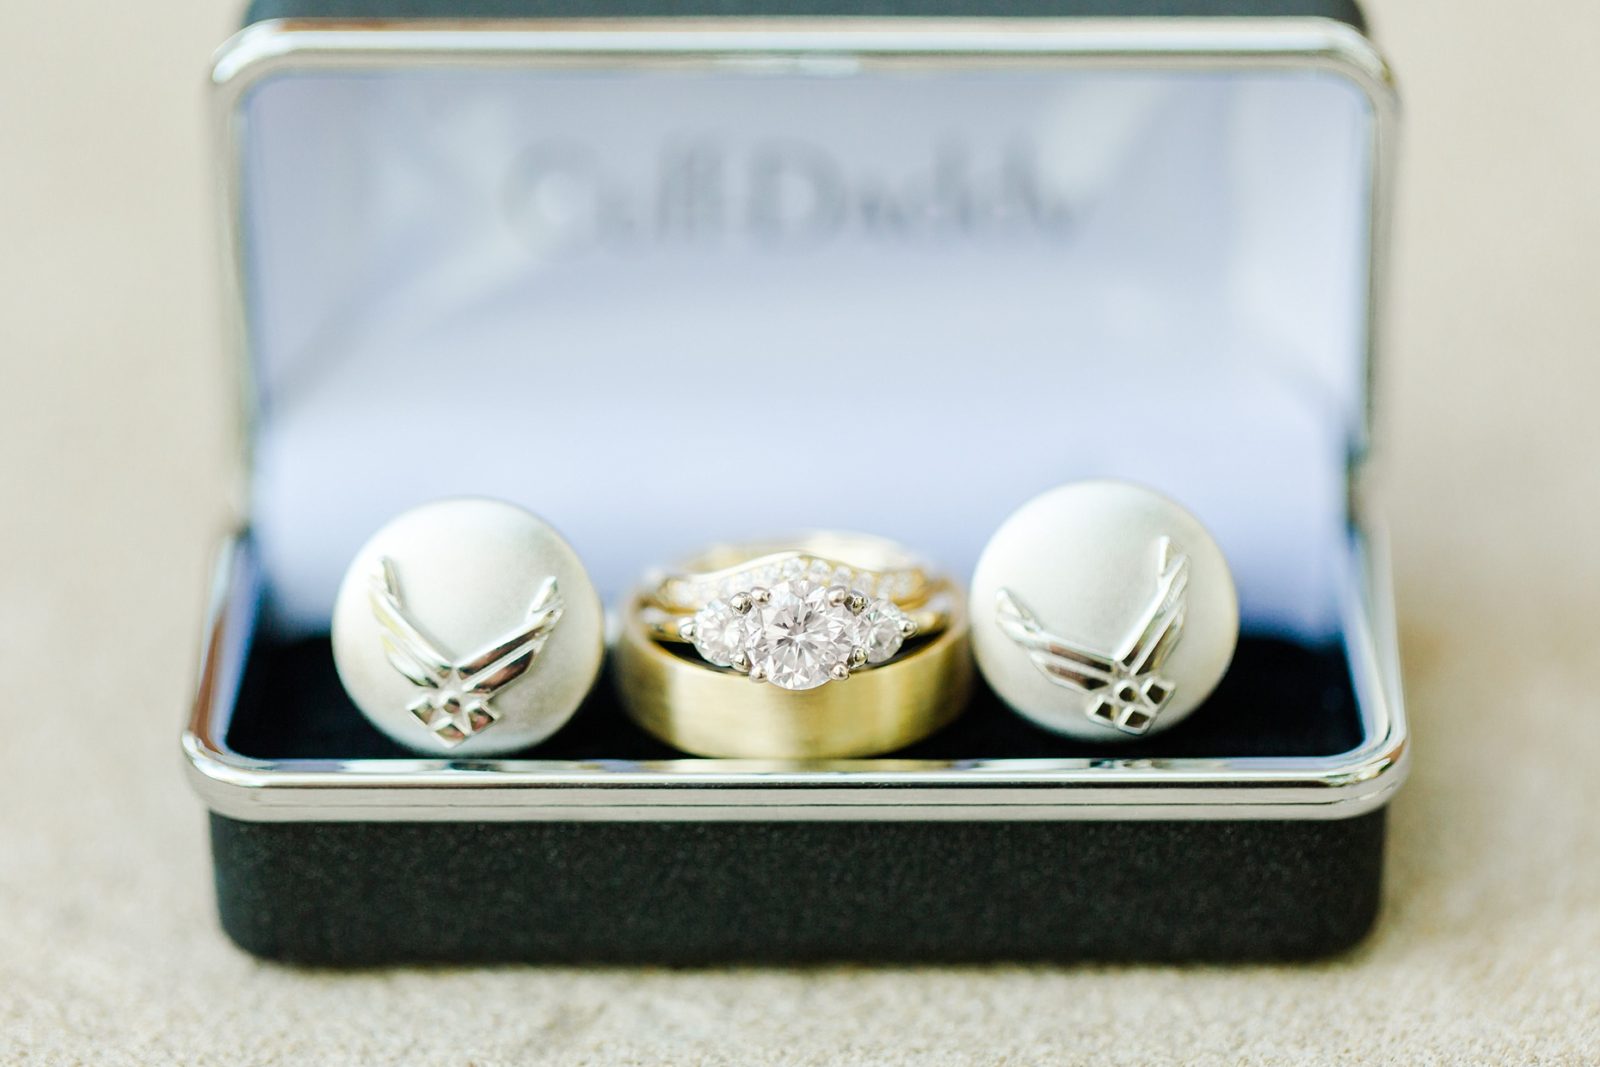 Wedding rings and cuff links